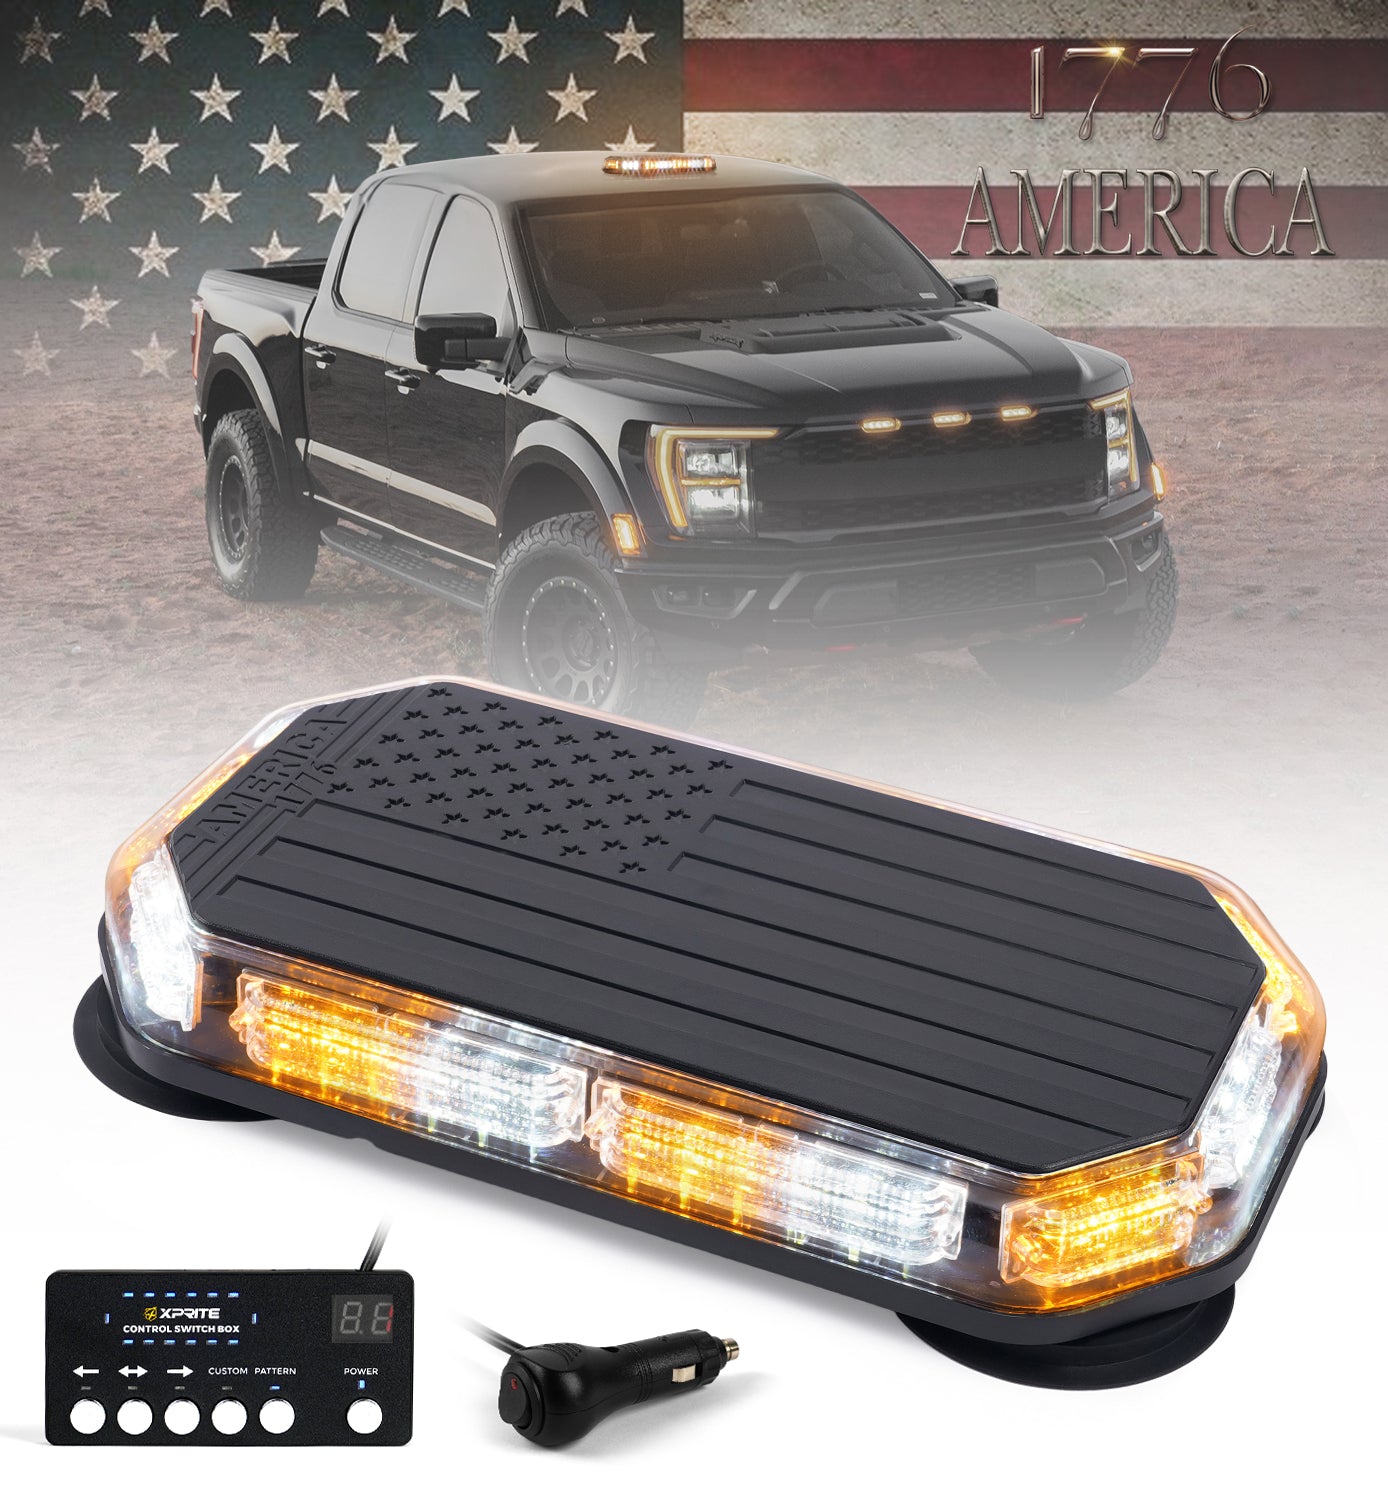 42 LED Rooftop Strobe Light with American Flag Design